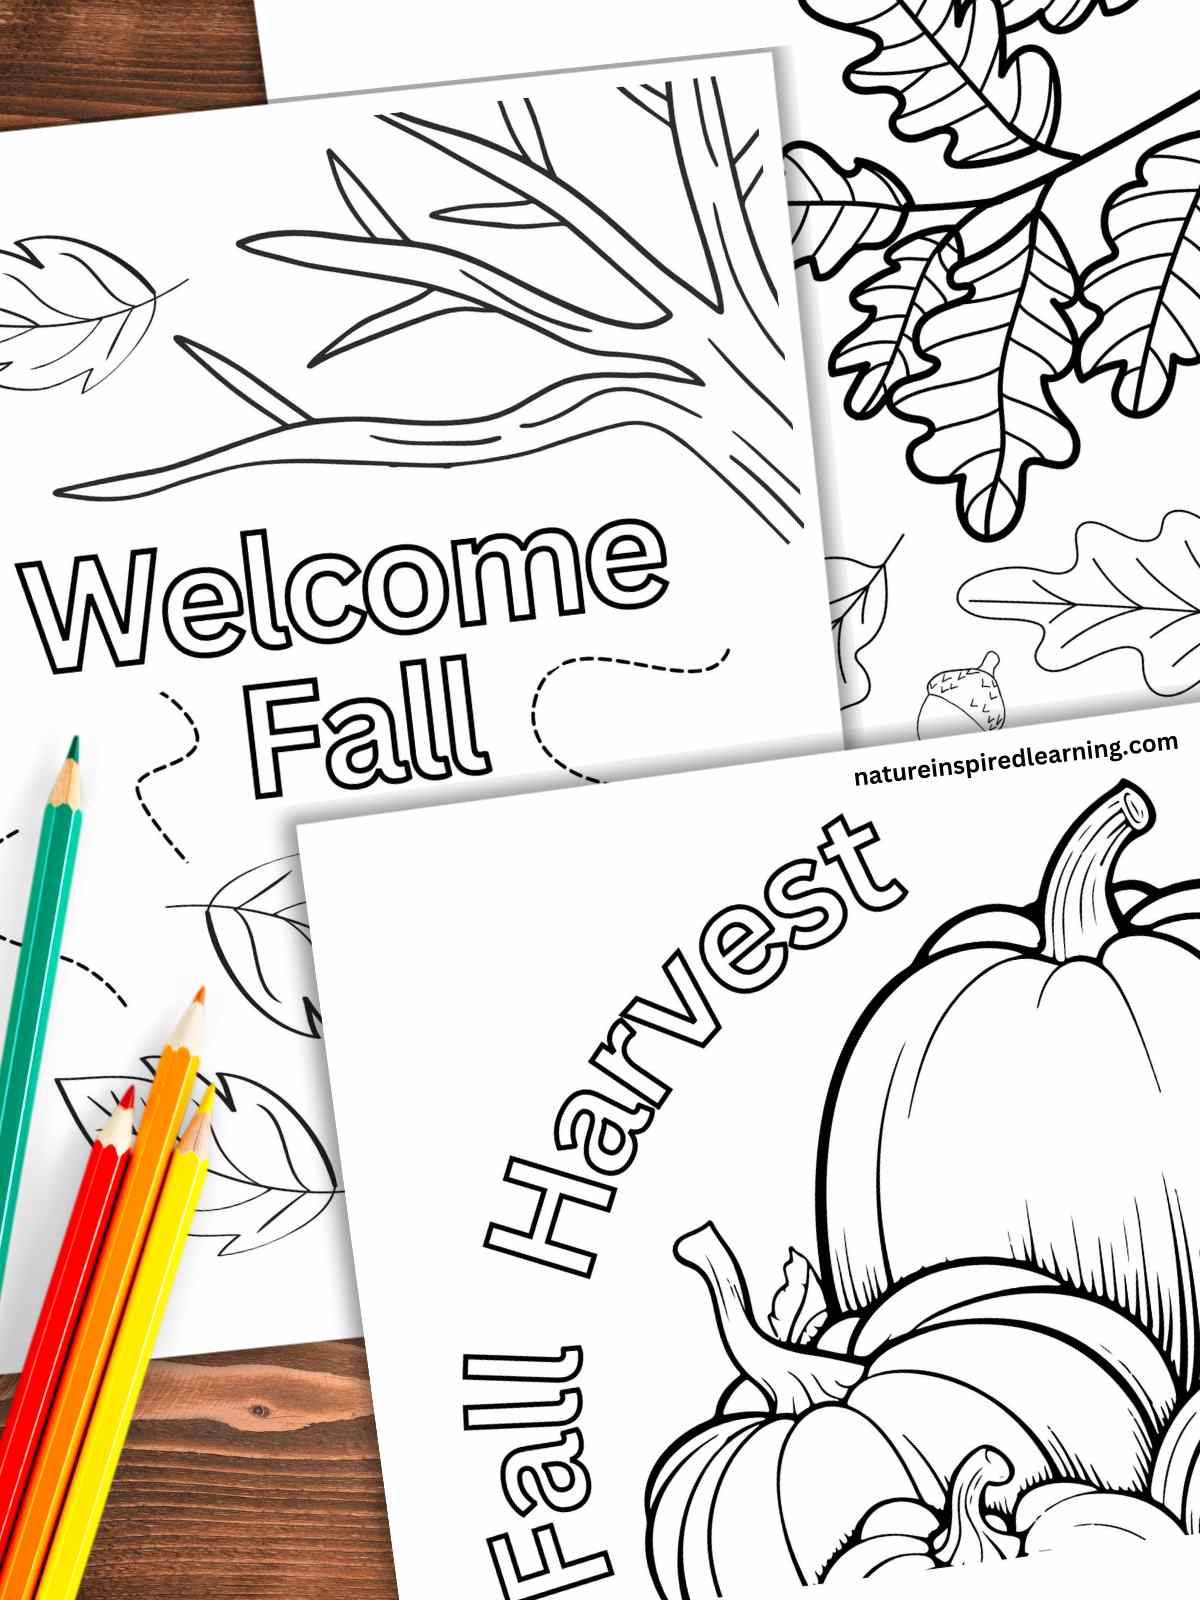 Fall coloring pages for autumn